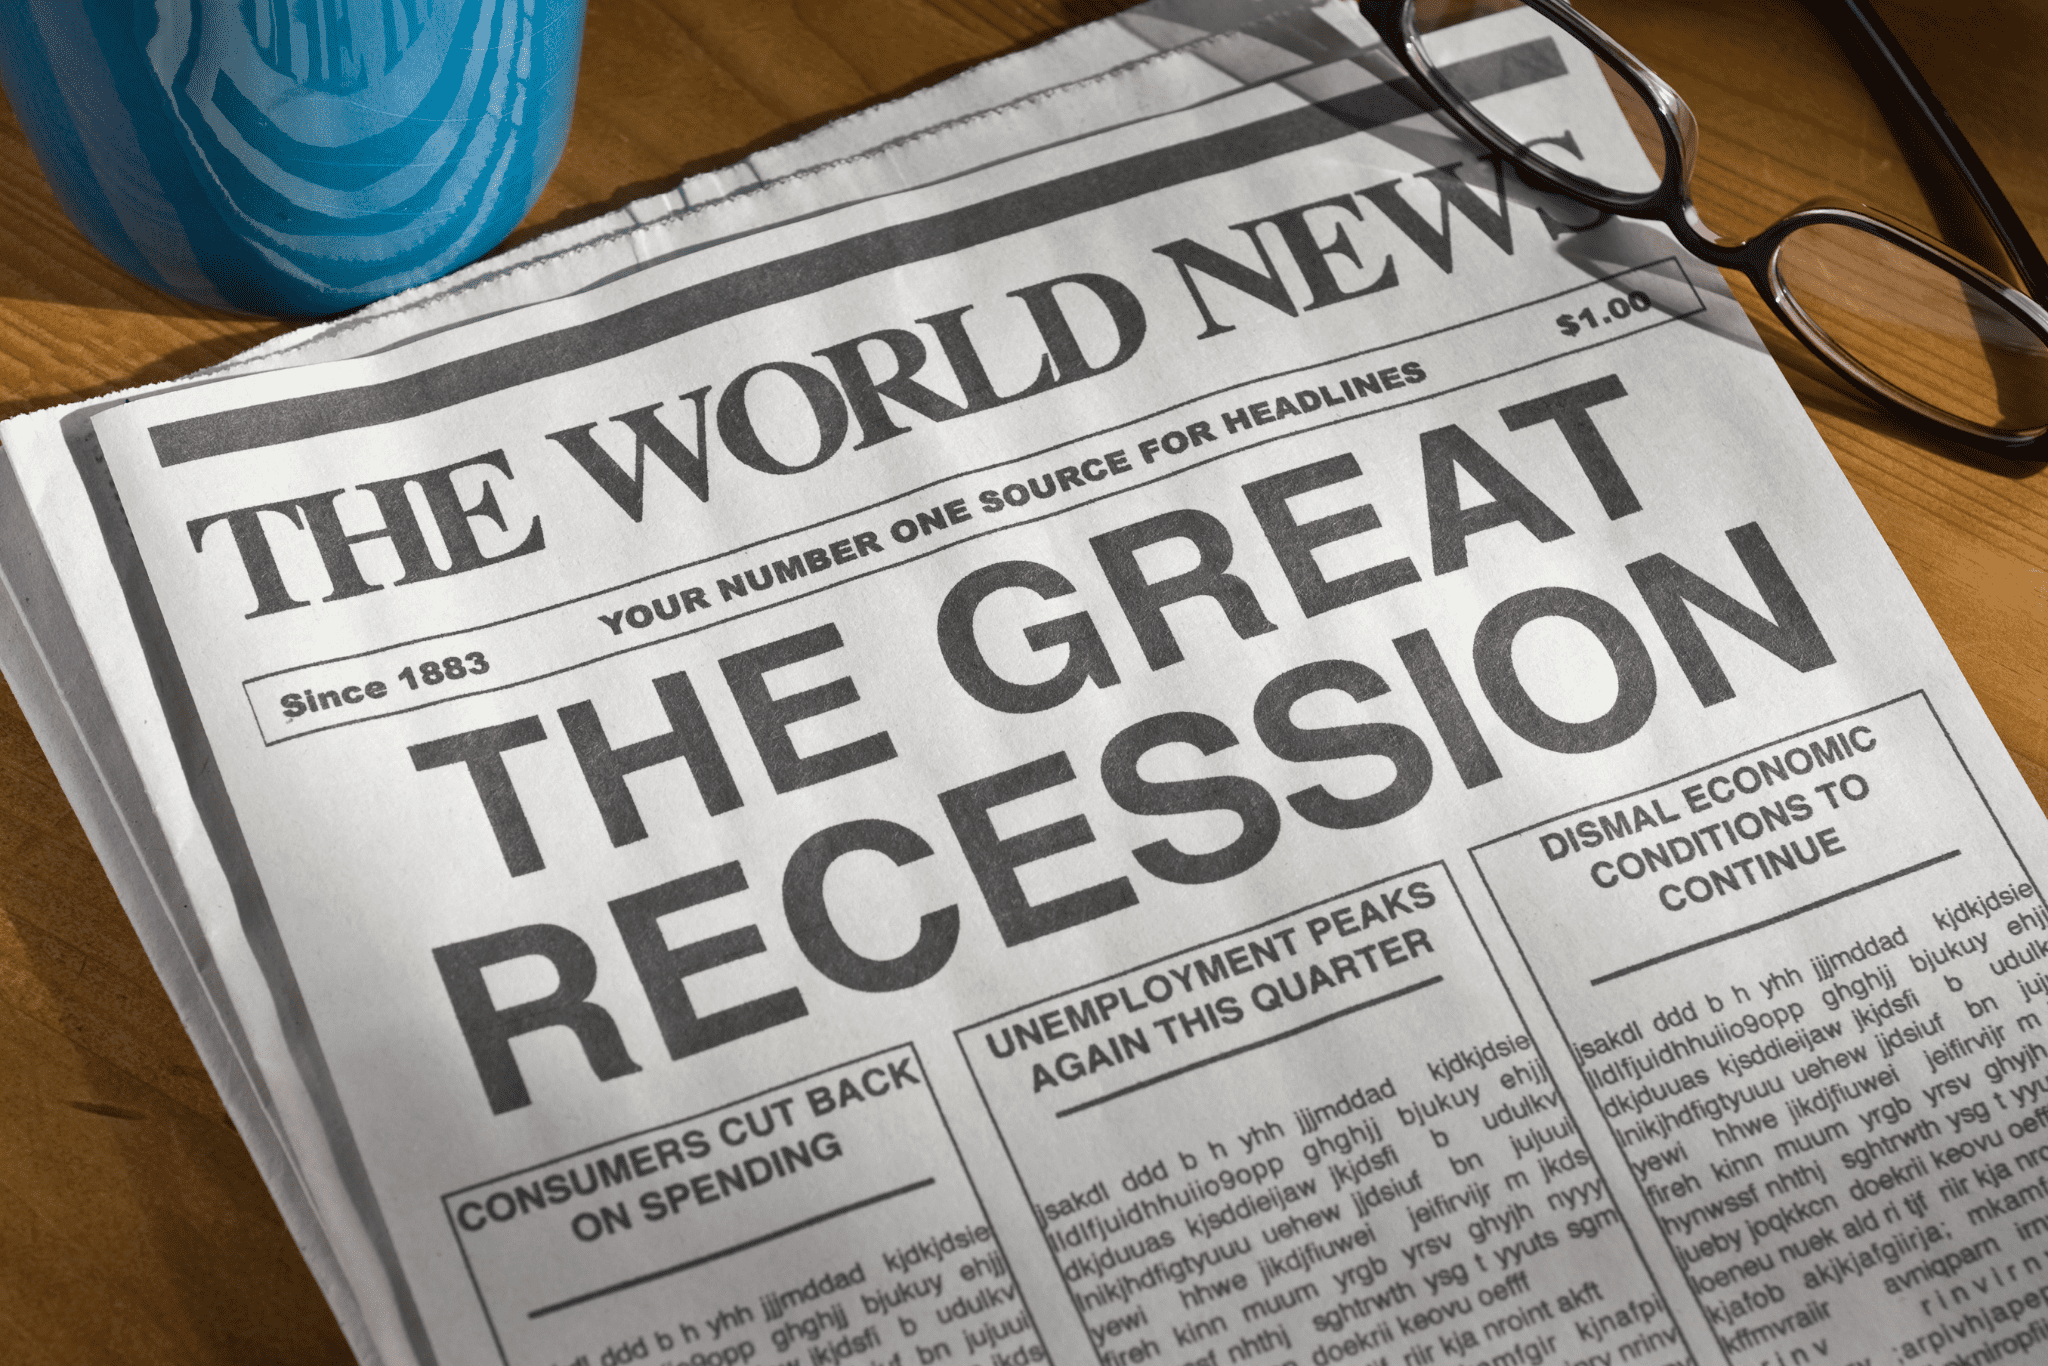 Lessons from the Great Recession of 2007-2009